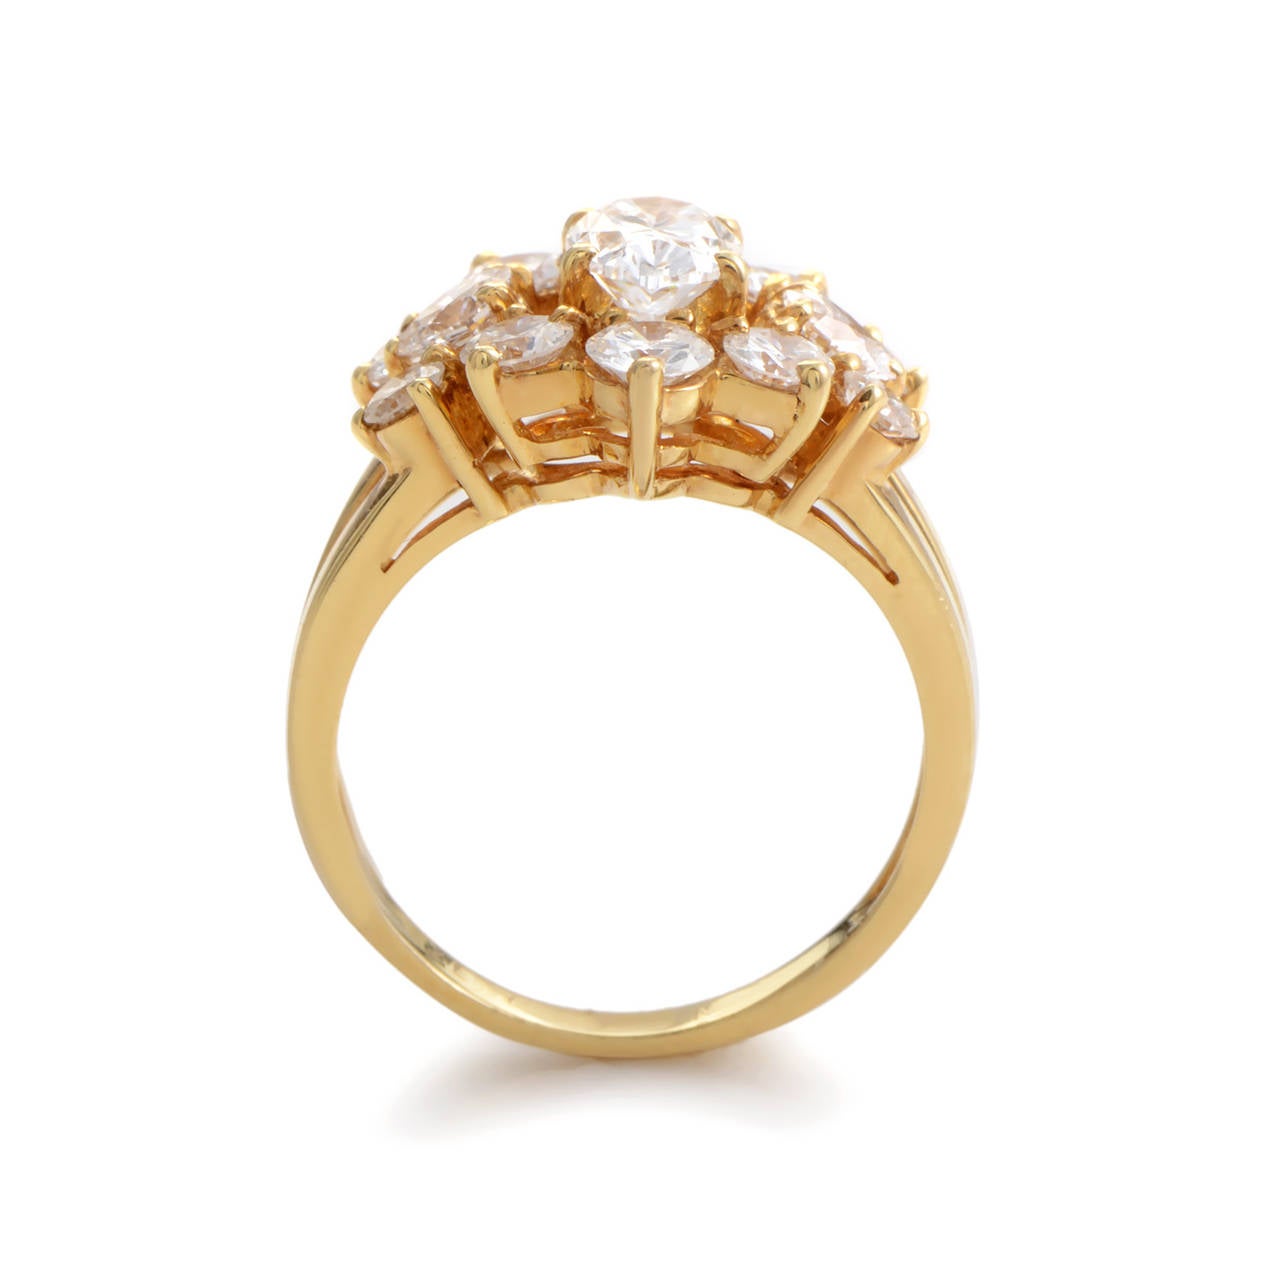 This ring from Chaumet has a decadent design that glitters with a fiery glow. The ring is made of 18K yellow gold and boasts a .75 carat diamond center surrounded by 1.50 carats of diamonds.

Ring Size: US 5.75 (50 7/8)